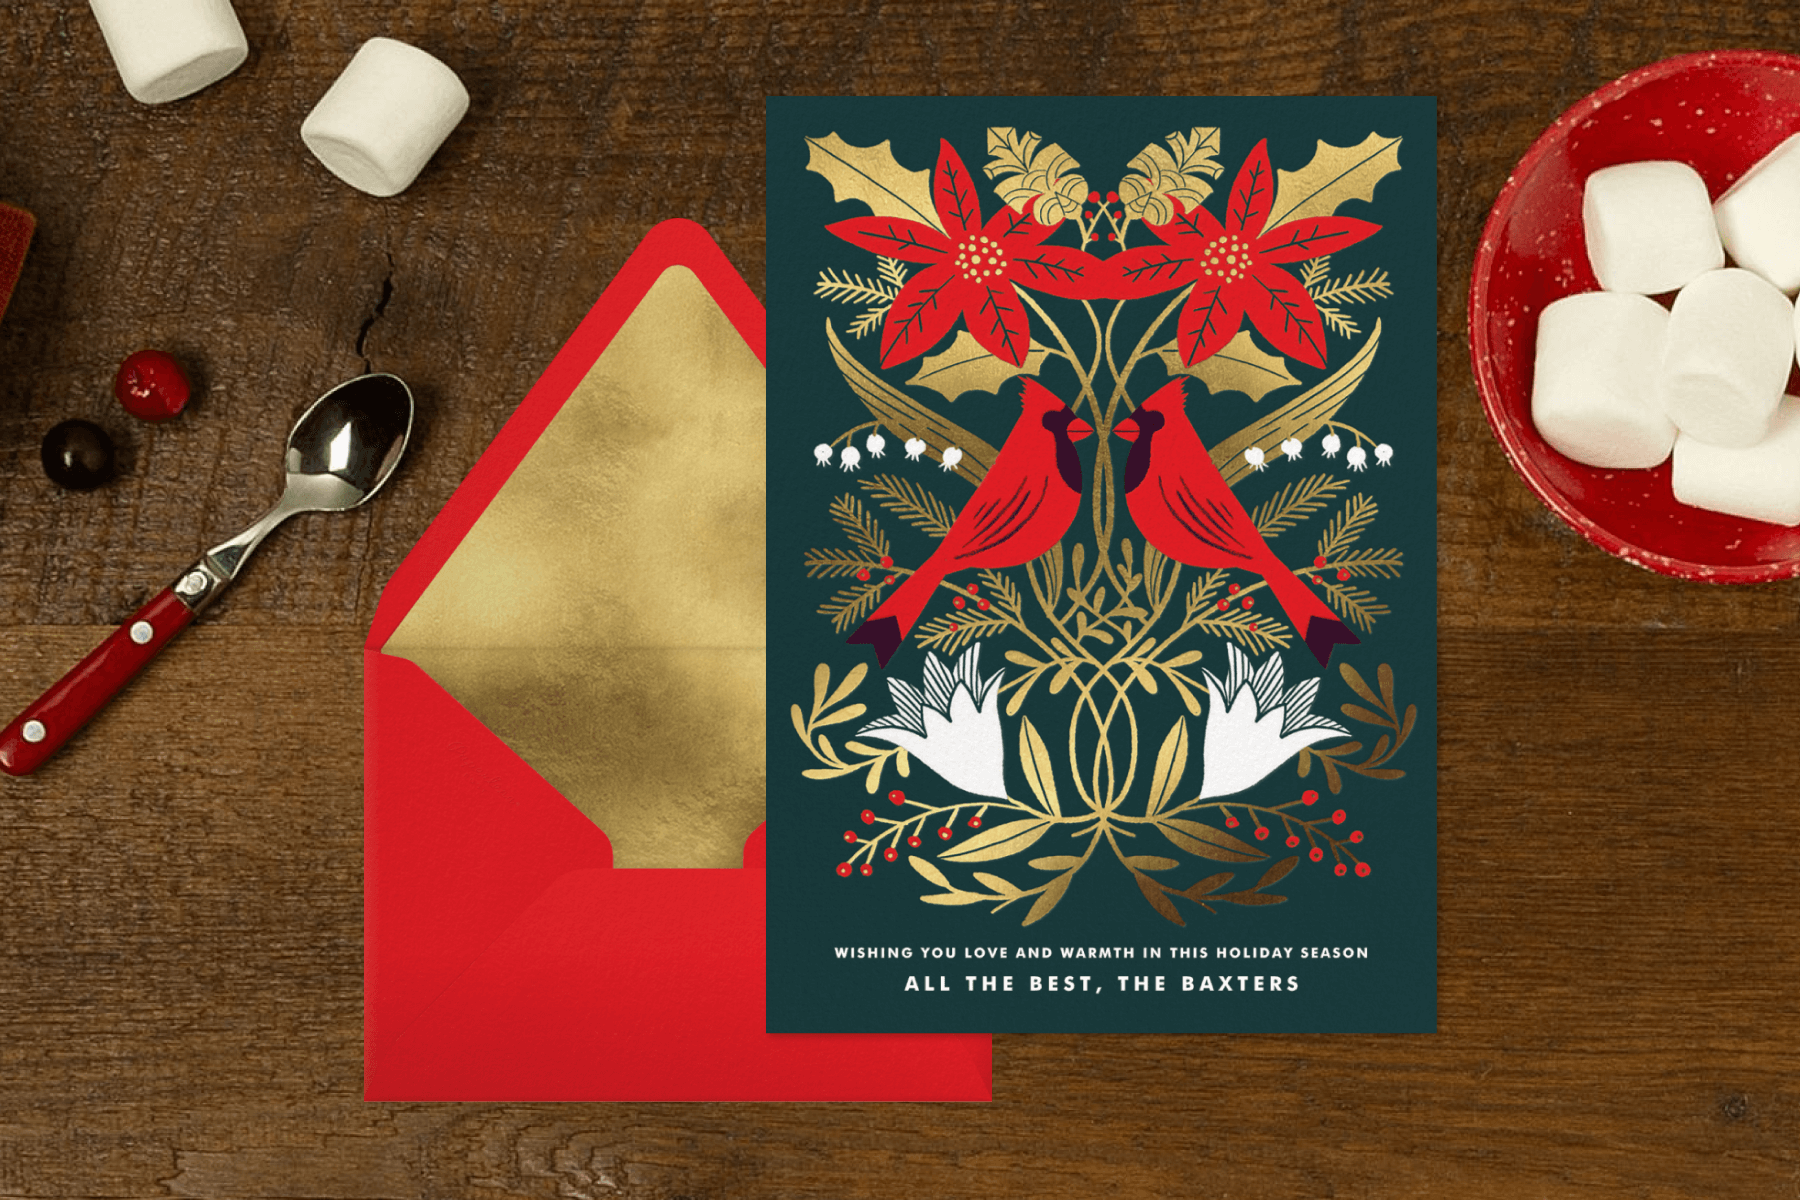 A holiday card with gold greenery, poinsettia, and cardinals beside a red envelope on a wood background with a spoon and marshmallows.